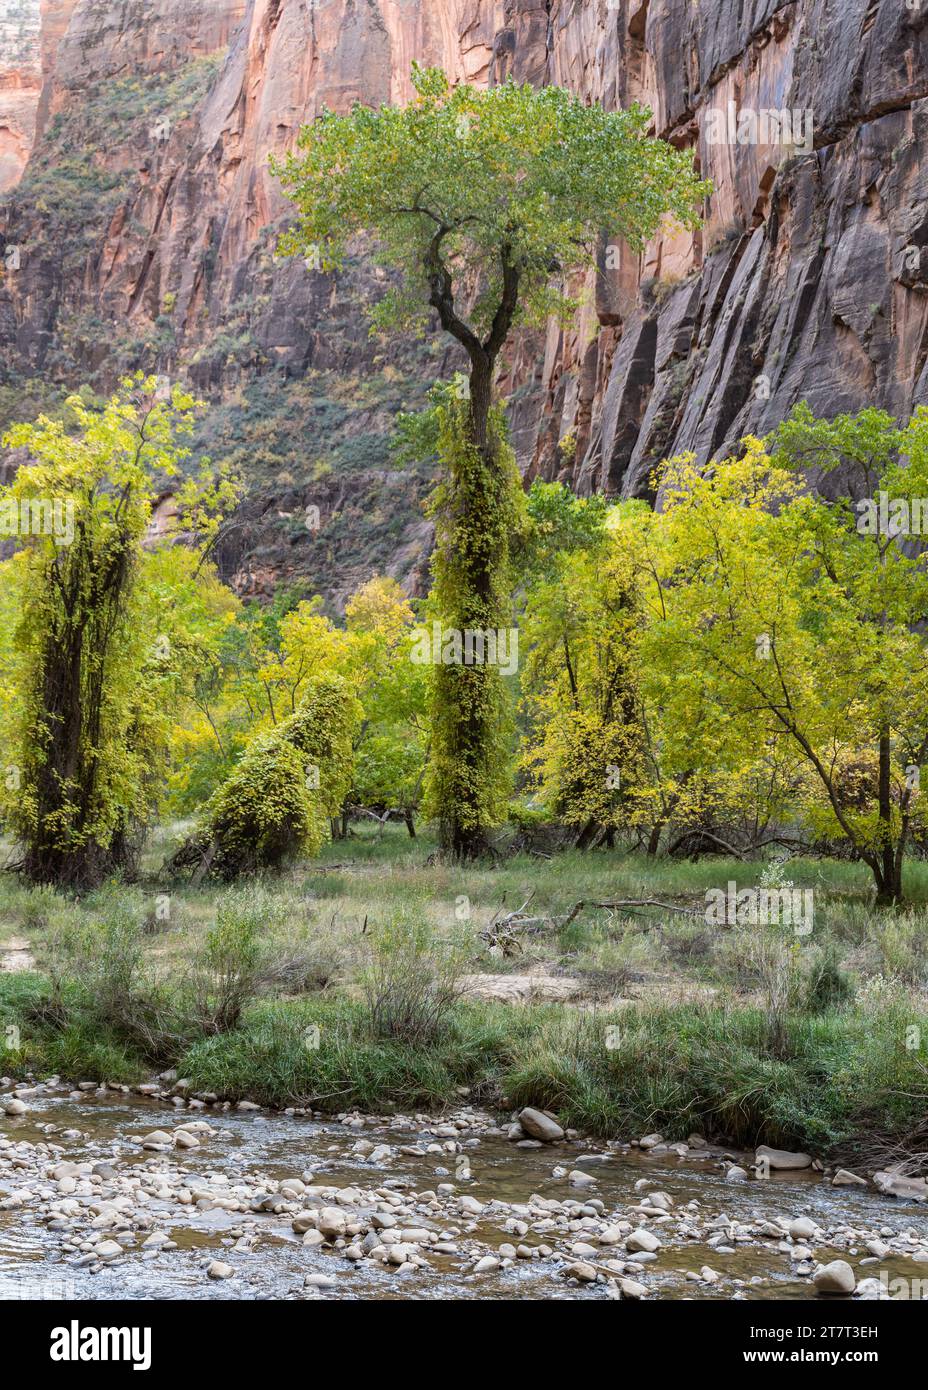 Autumn colors on the Riverside Walk and Virgin river, in Zion National Park, near Springdale, Utah. Stock Photo